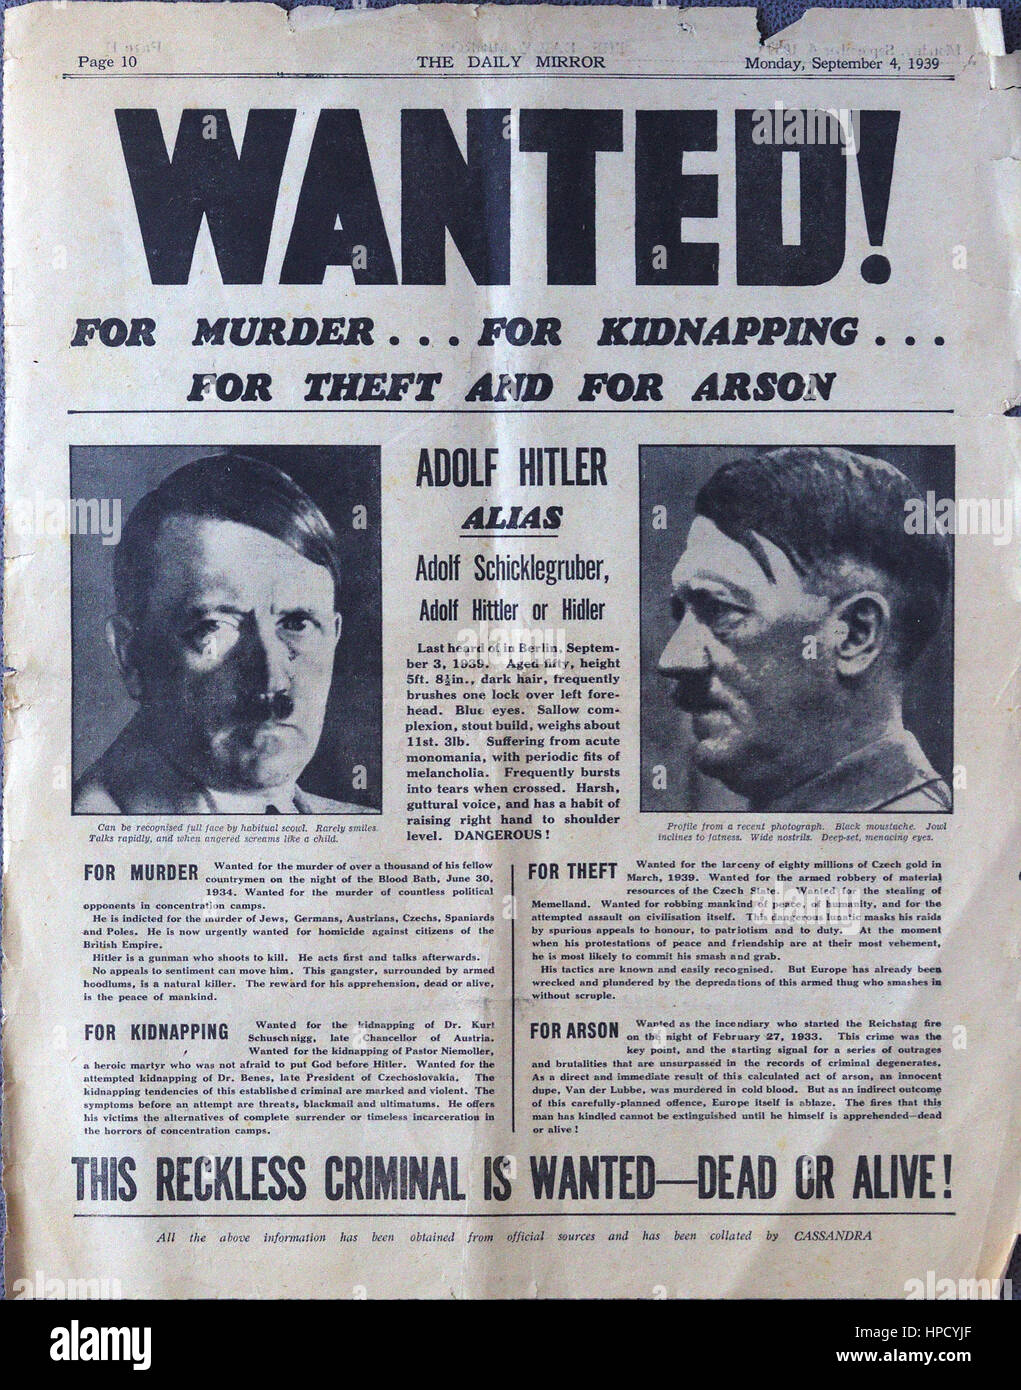 This 'WANTED' poster presents Adolf Hitler as a 'reckless criminal ... Wanted Hitler- dead or alive'.Page of September 4,1939 Daily Mirror newspaper Stock Photo